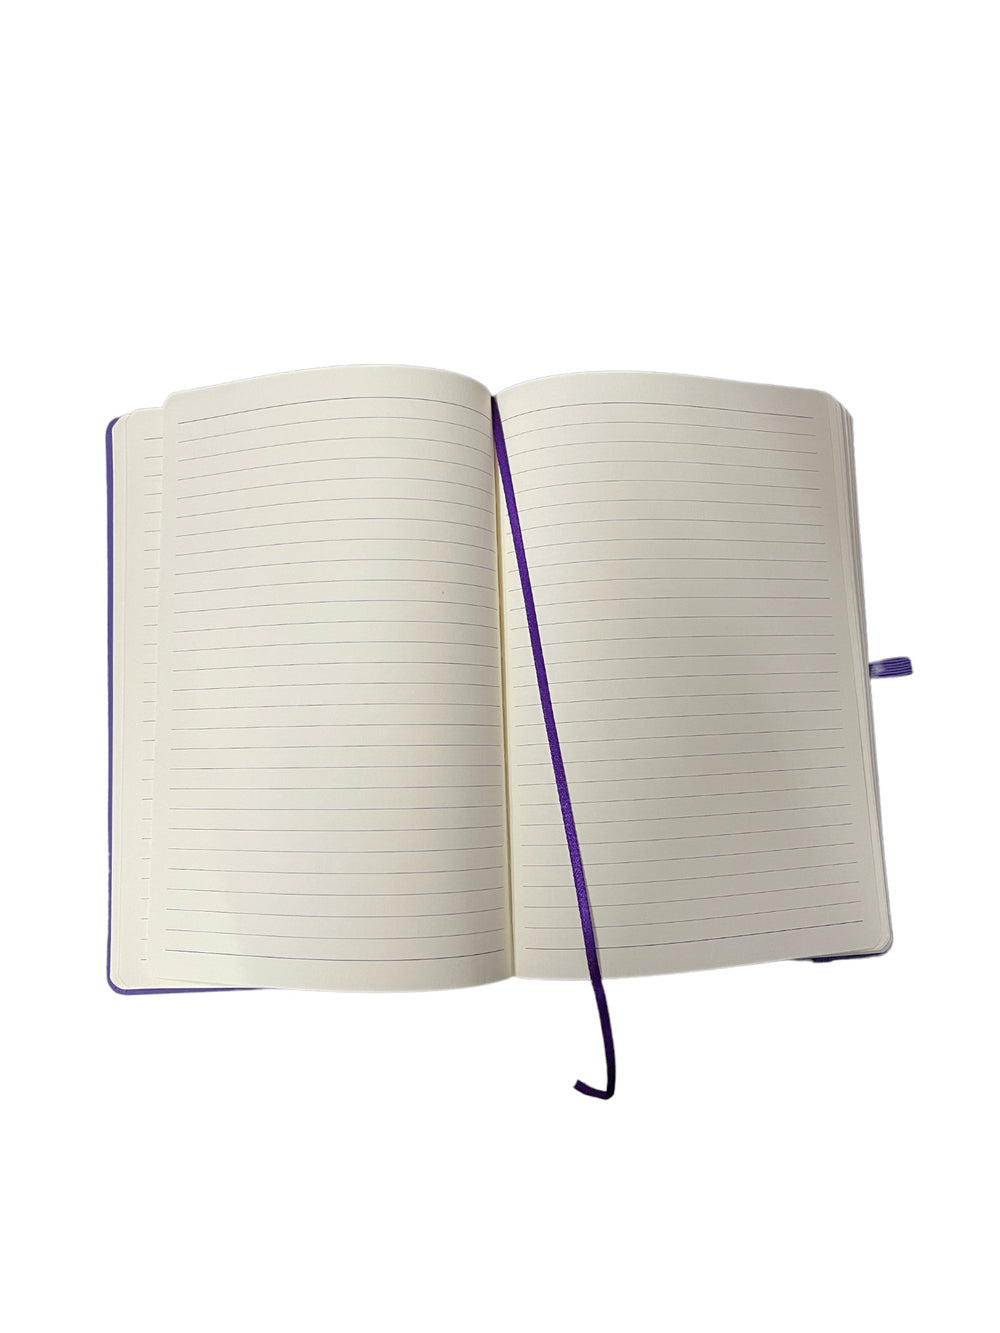 Prince – Xclusive & Official Purple & Embossed Gold Foil Love Symbol Note Book / Journal